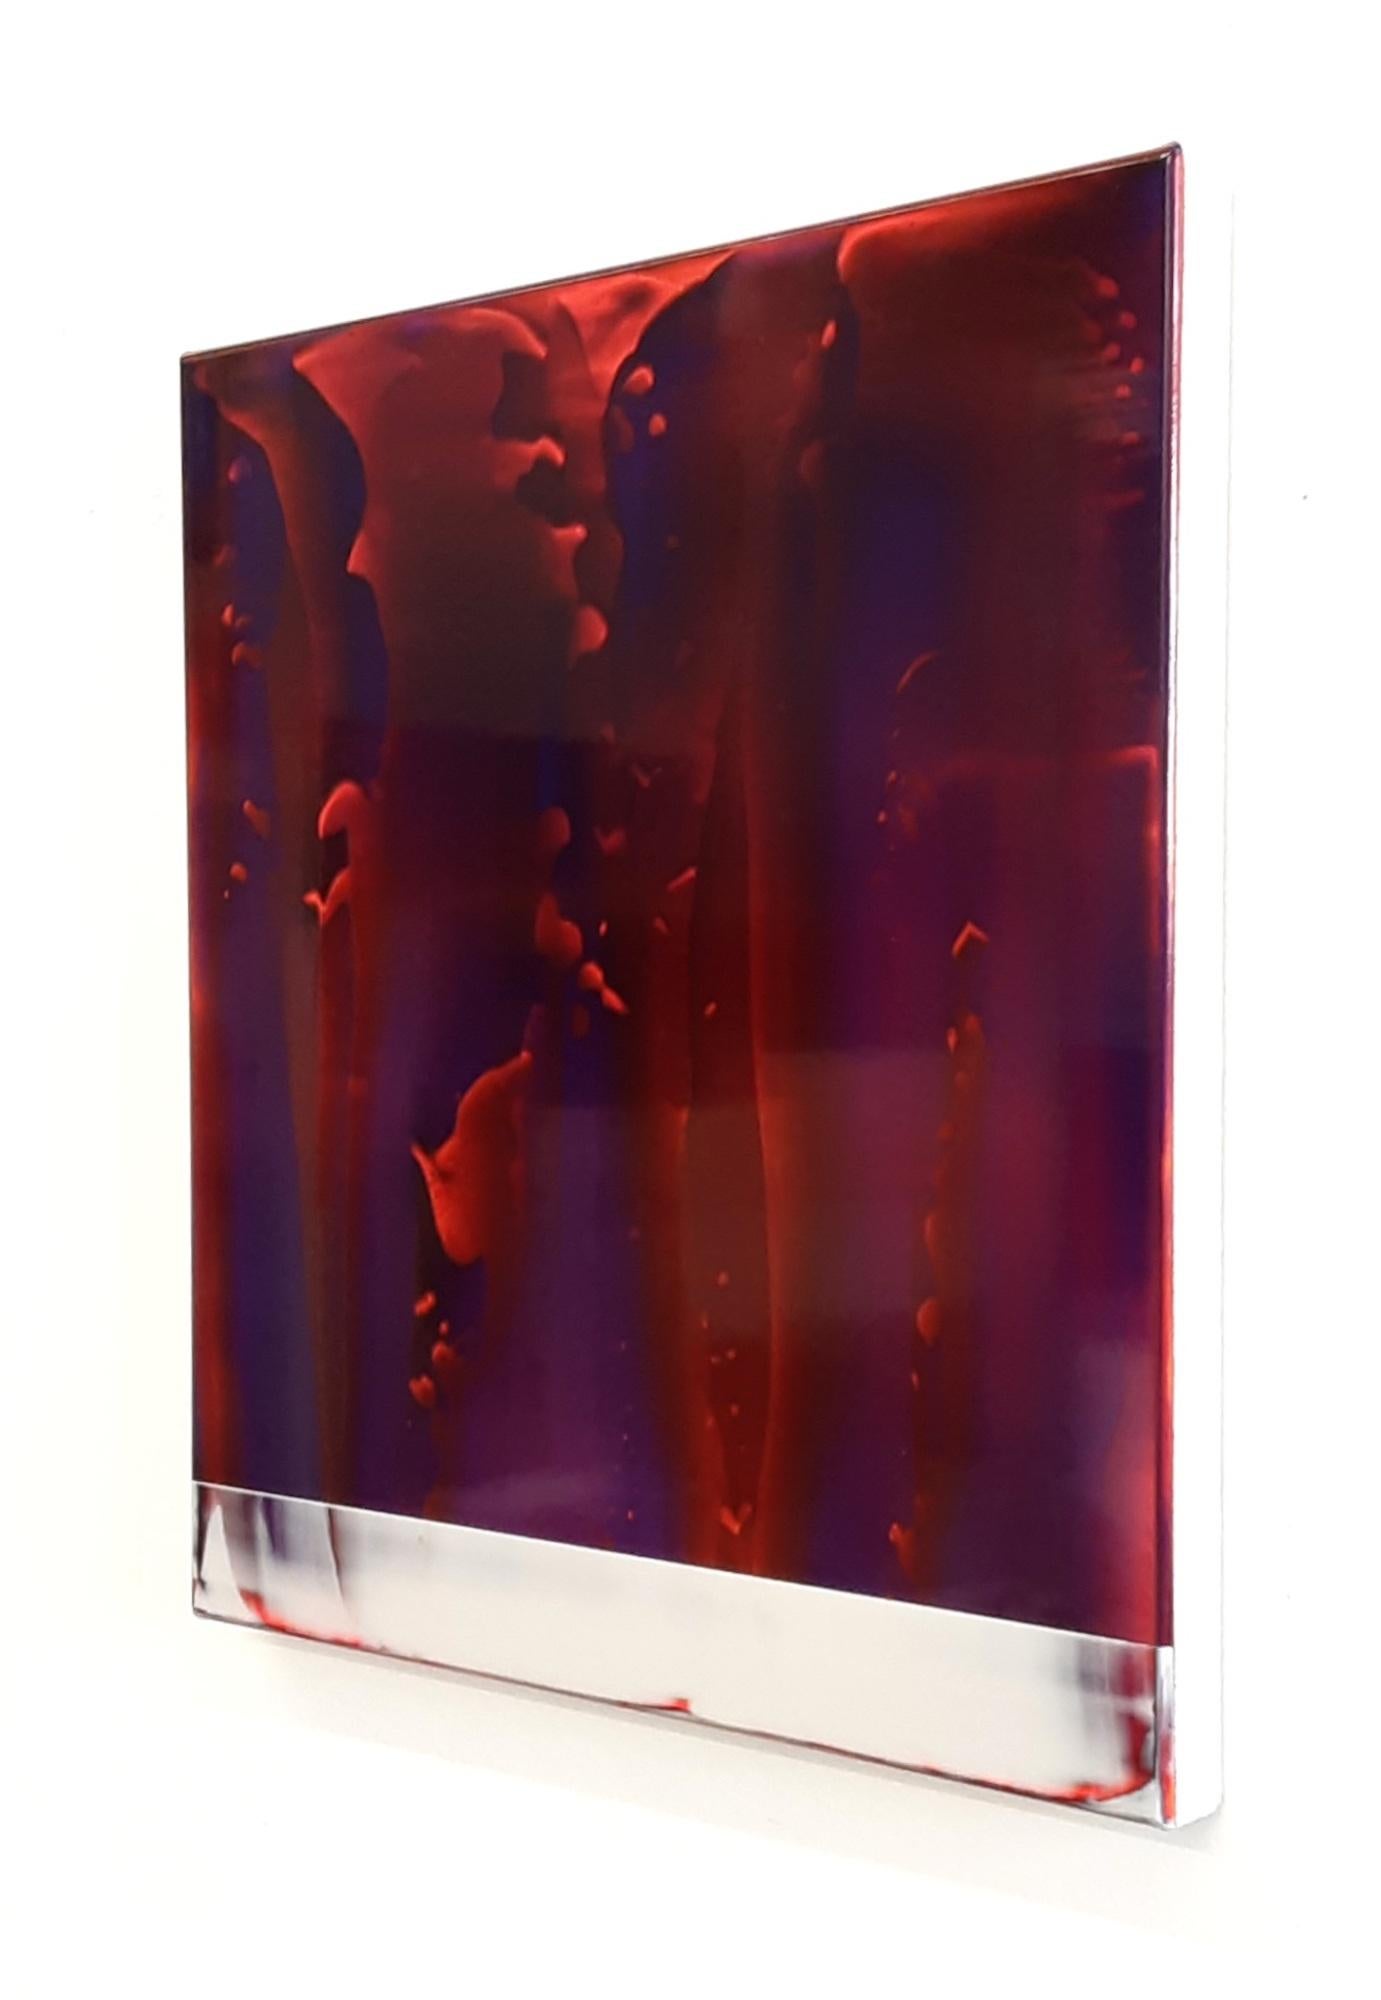 Echoes (2/19) by James Lumsden - Abstract colour painting, violet & bright red For Sale 3